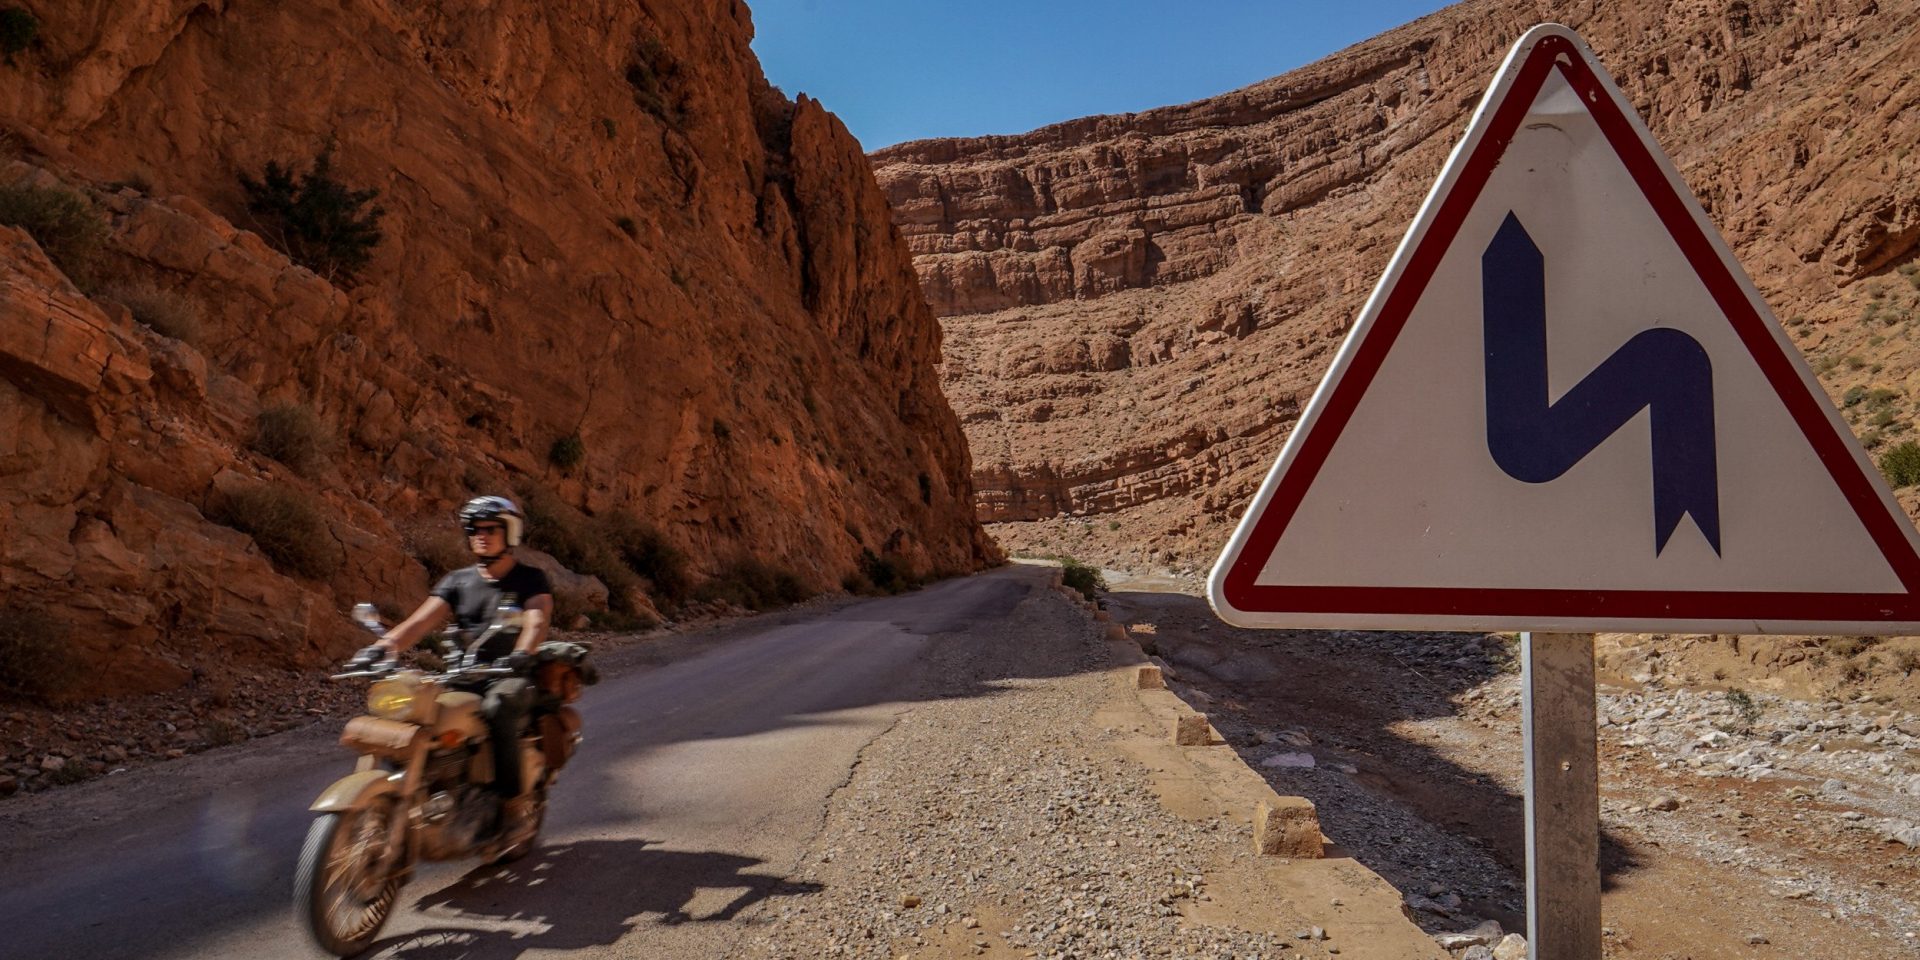 Motorcycle road trip Morocco - The gateway to the desert